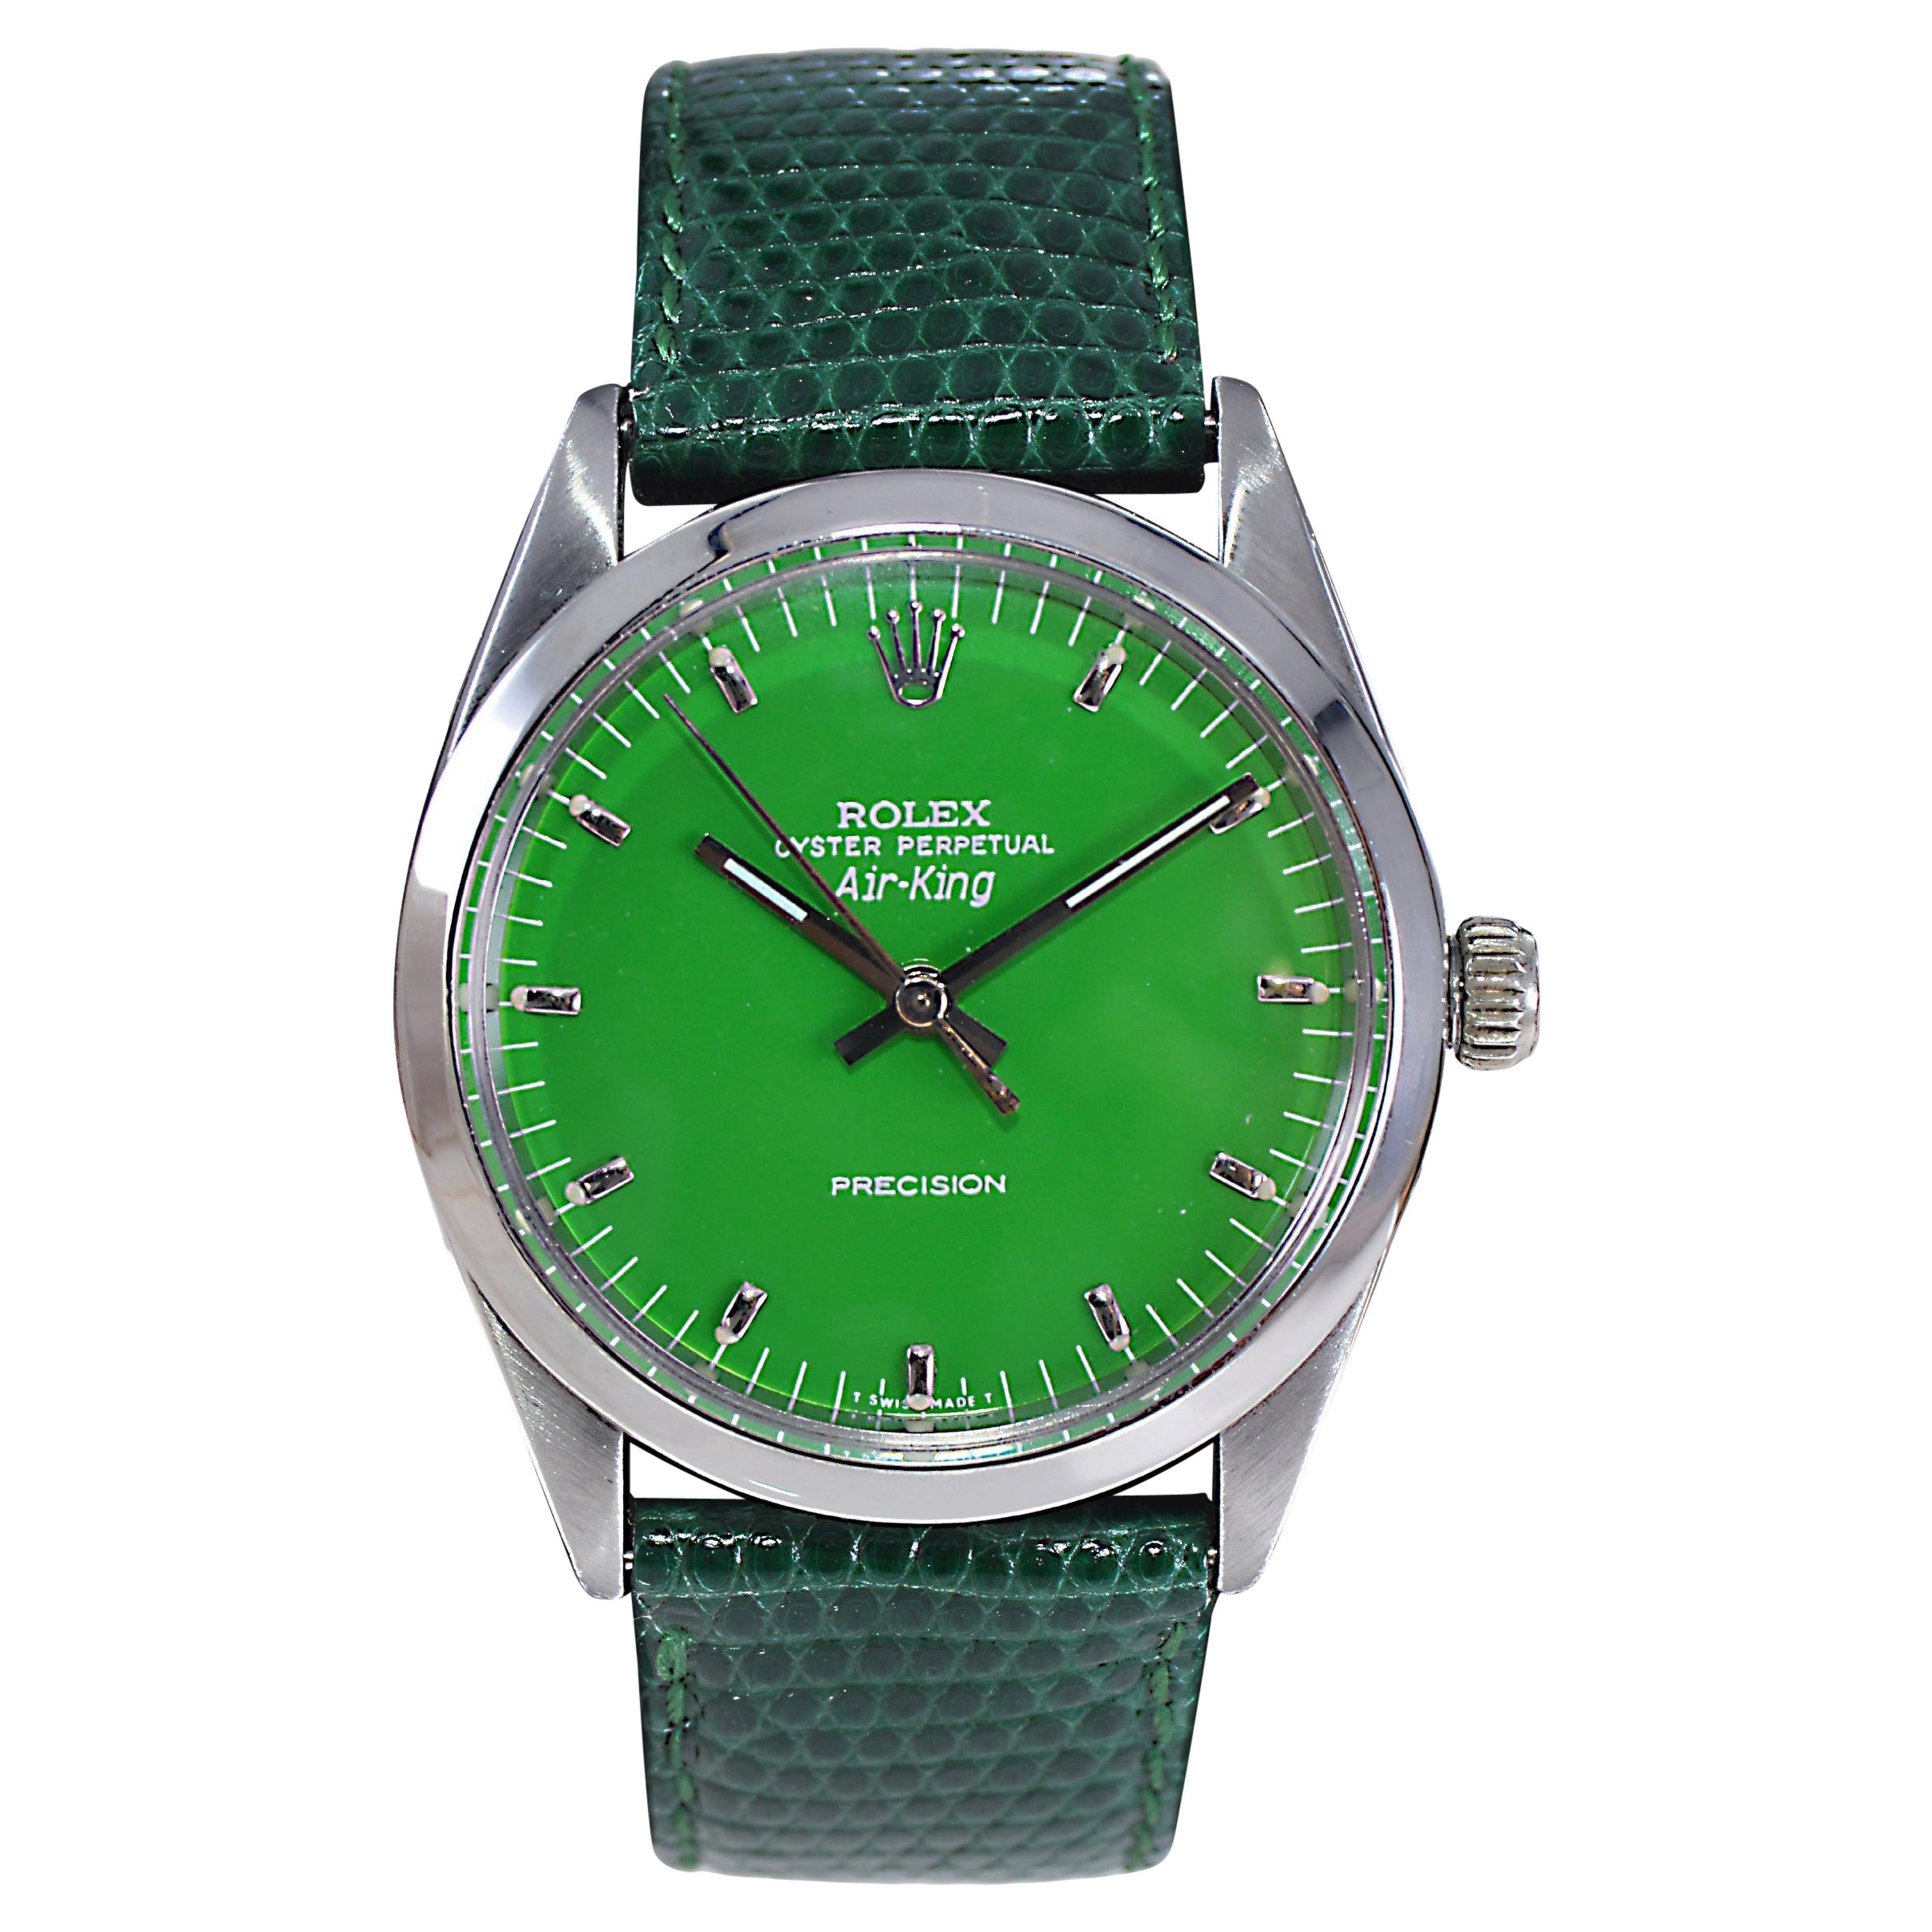 Rolex Stainless Steel Air King with a Custom Made Green Dial from 1960's and 70'